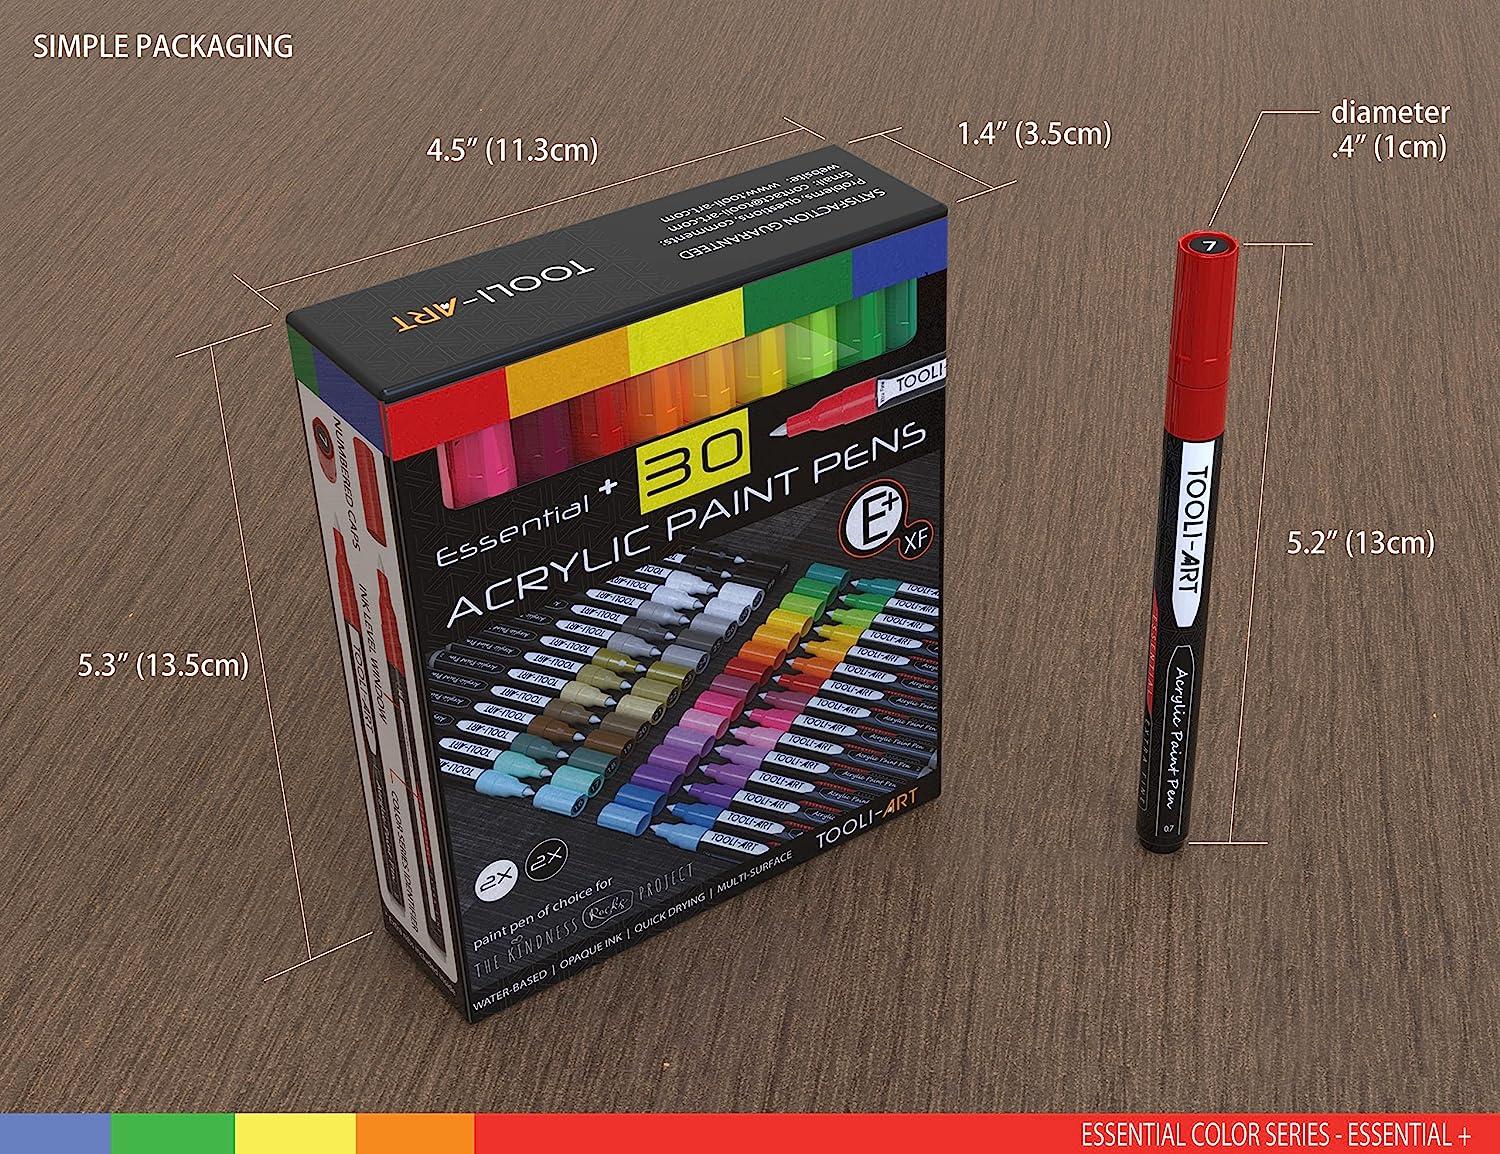 36 Acrylic Paint Pens Skin and Earth Tones (Pro Color Series Marker Set)  (3mm MEDIUM)